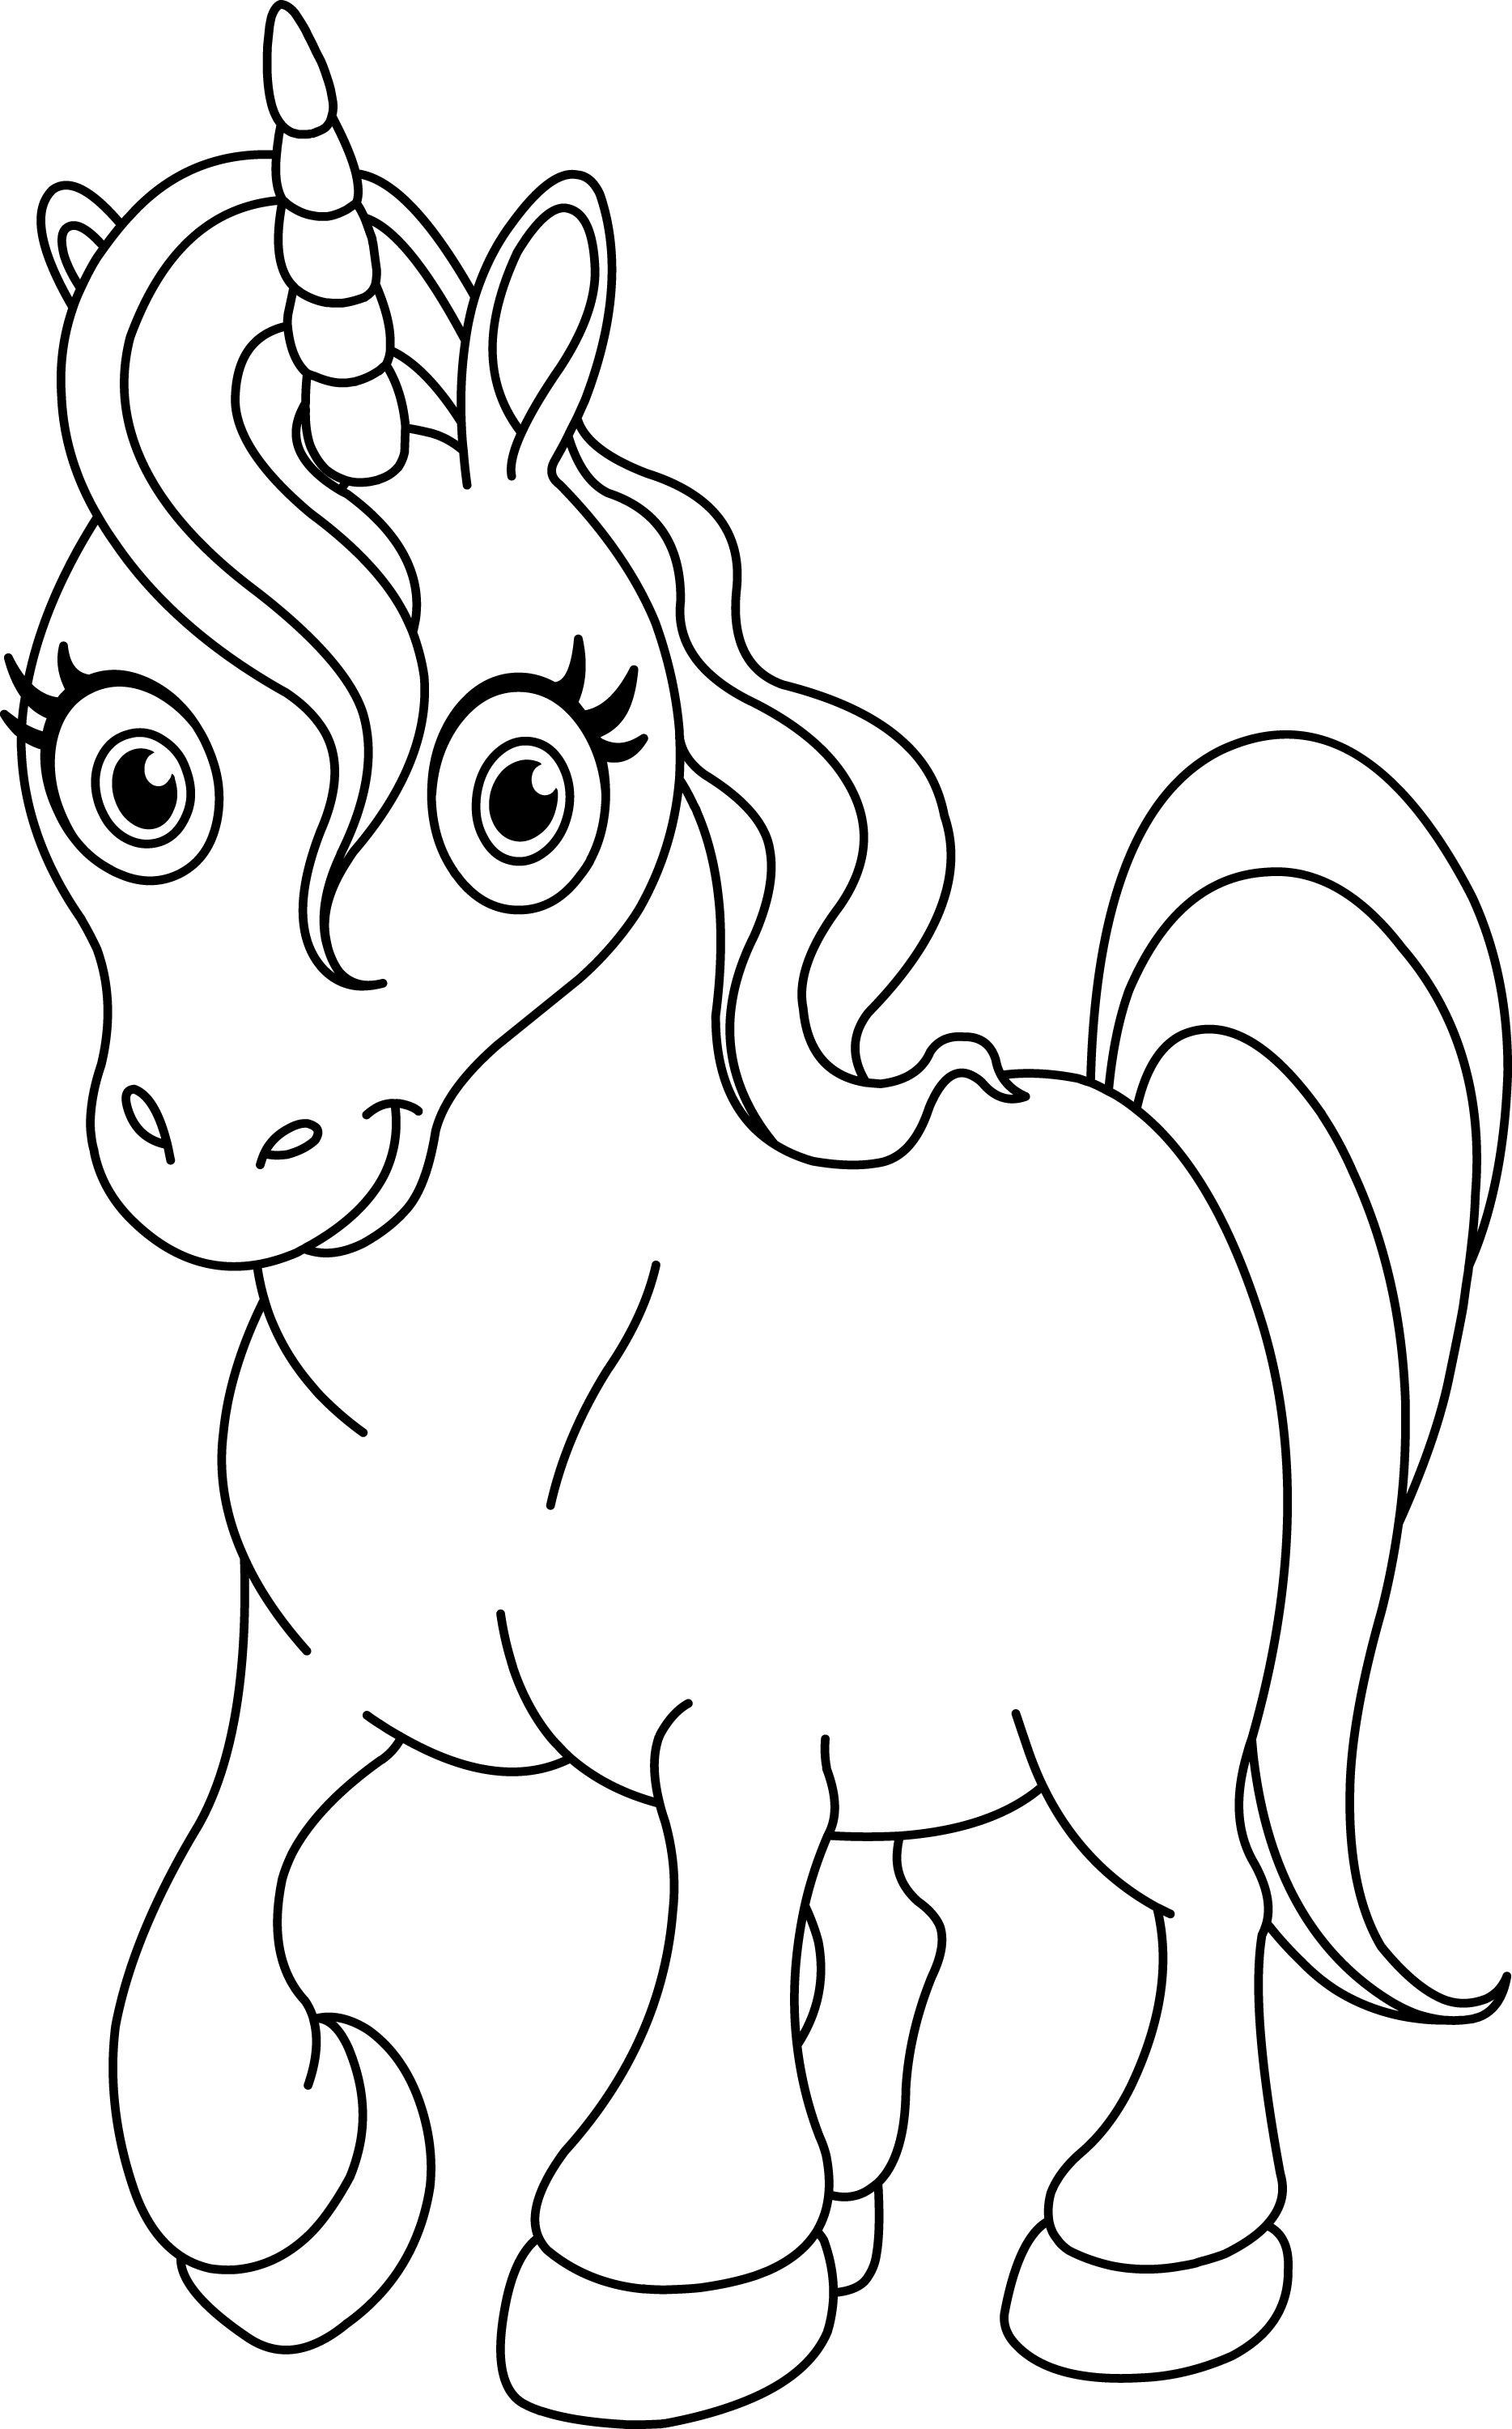 Girl Unicorn Coloring Pages
 Pay attention for this explanation to do the Unicorn